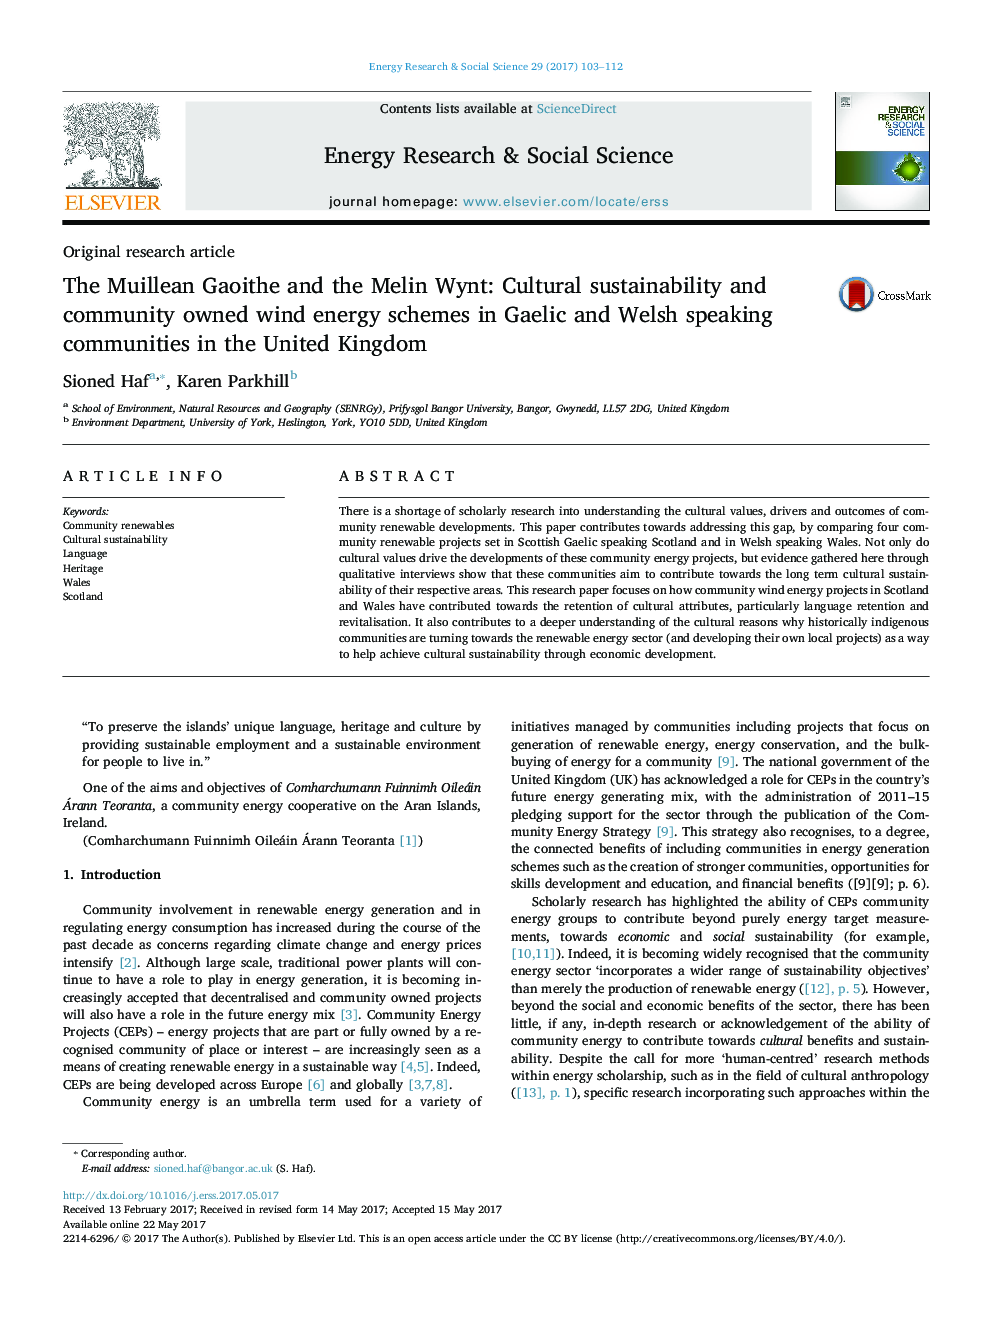 The Muillean Gaoithe and the Melin Wynt: Cultural sustainability and community owned wind energy schemes in Gaelic and Welsh speaking communities in the United Kingdom